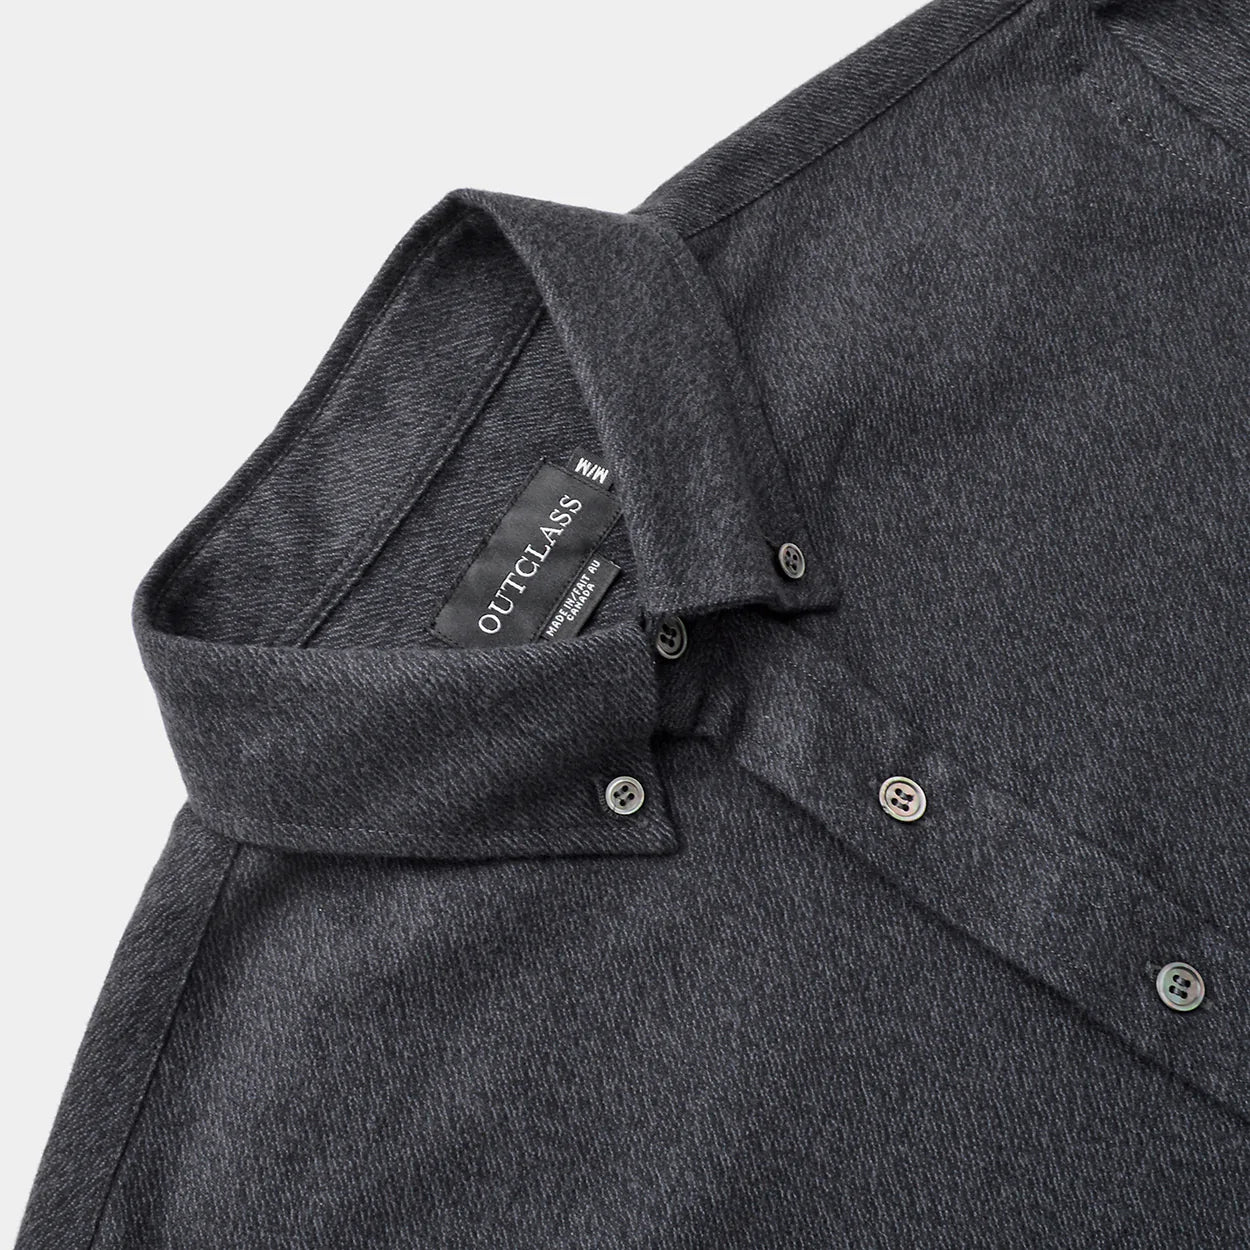 Charcoal Twill Flannel